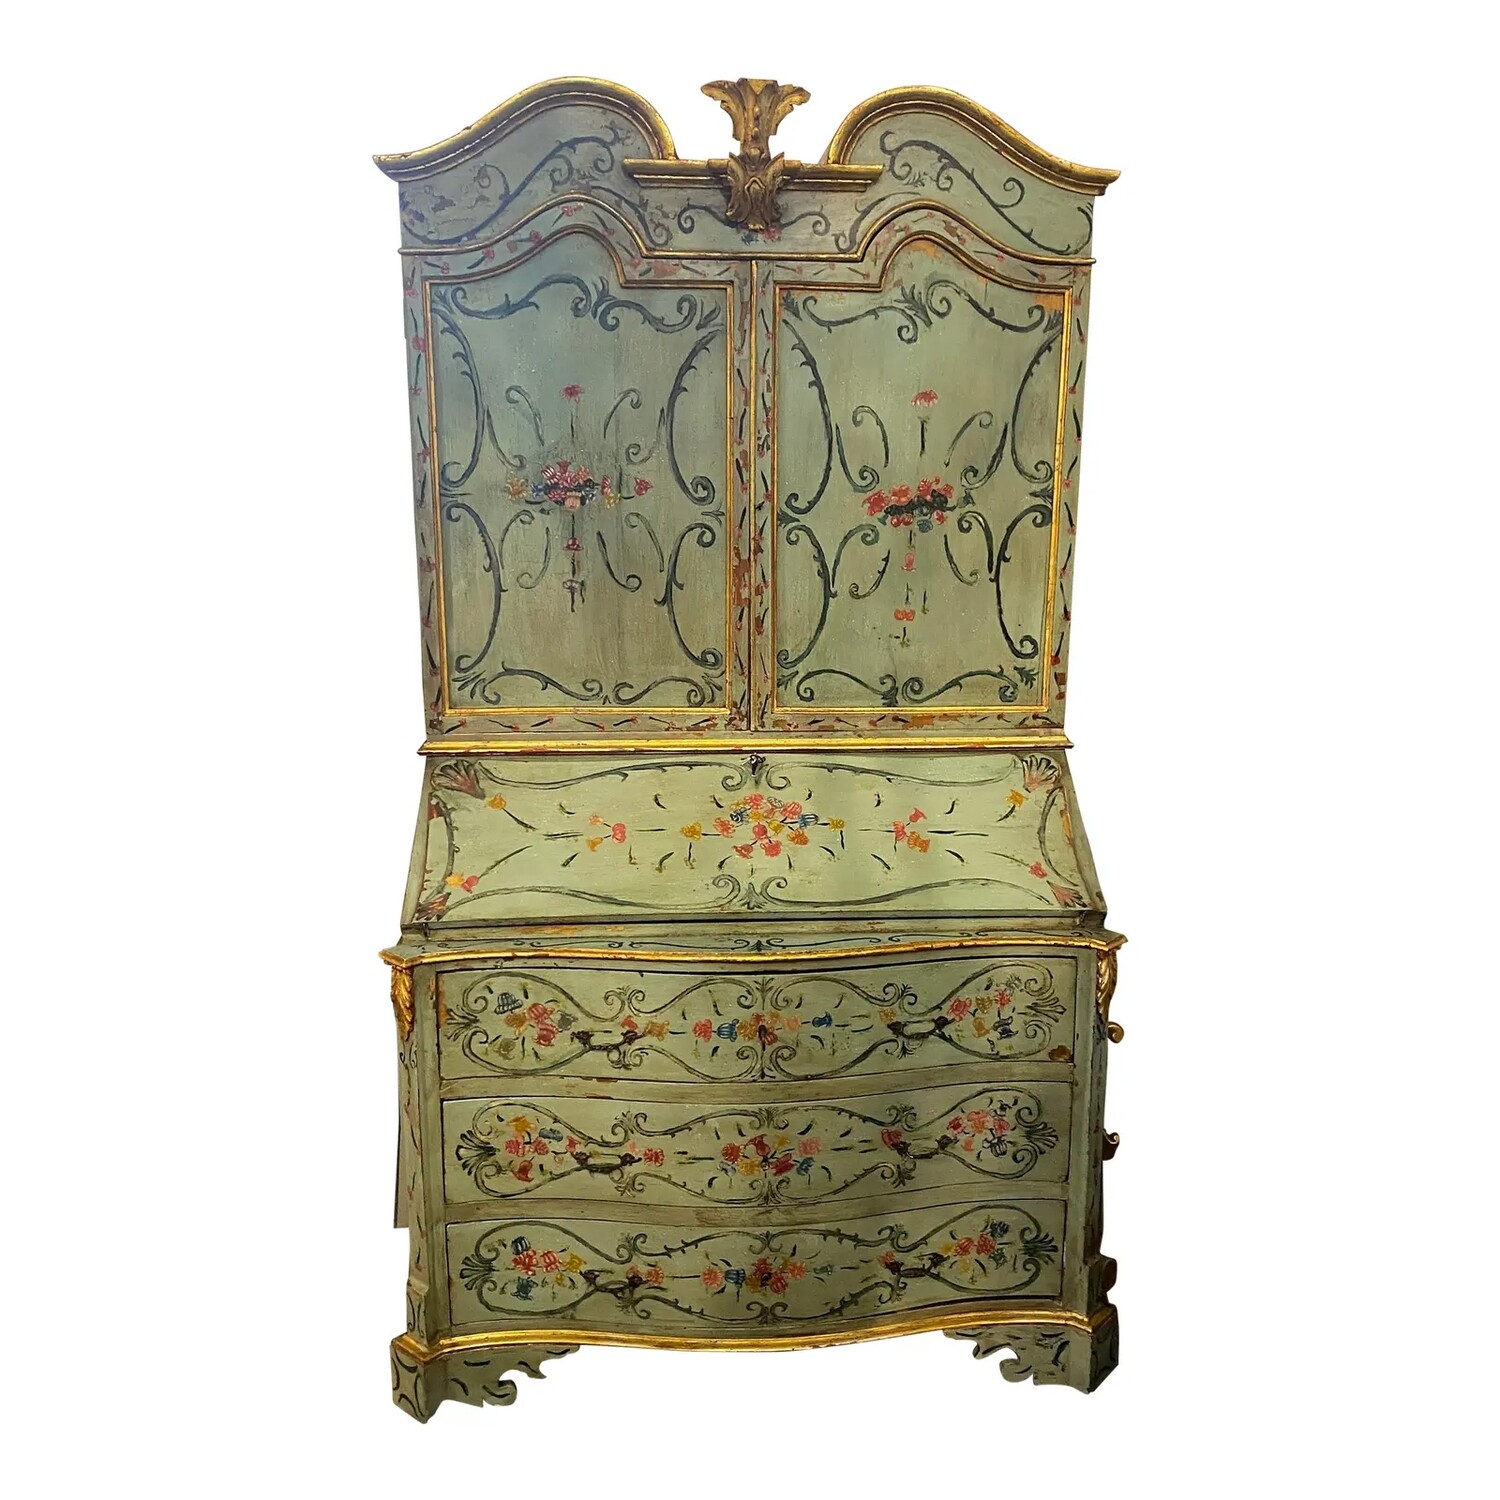 19th Century Lacquered and Painted Wood Sicilian Trumeau